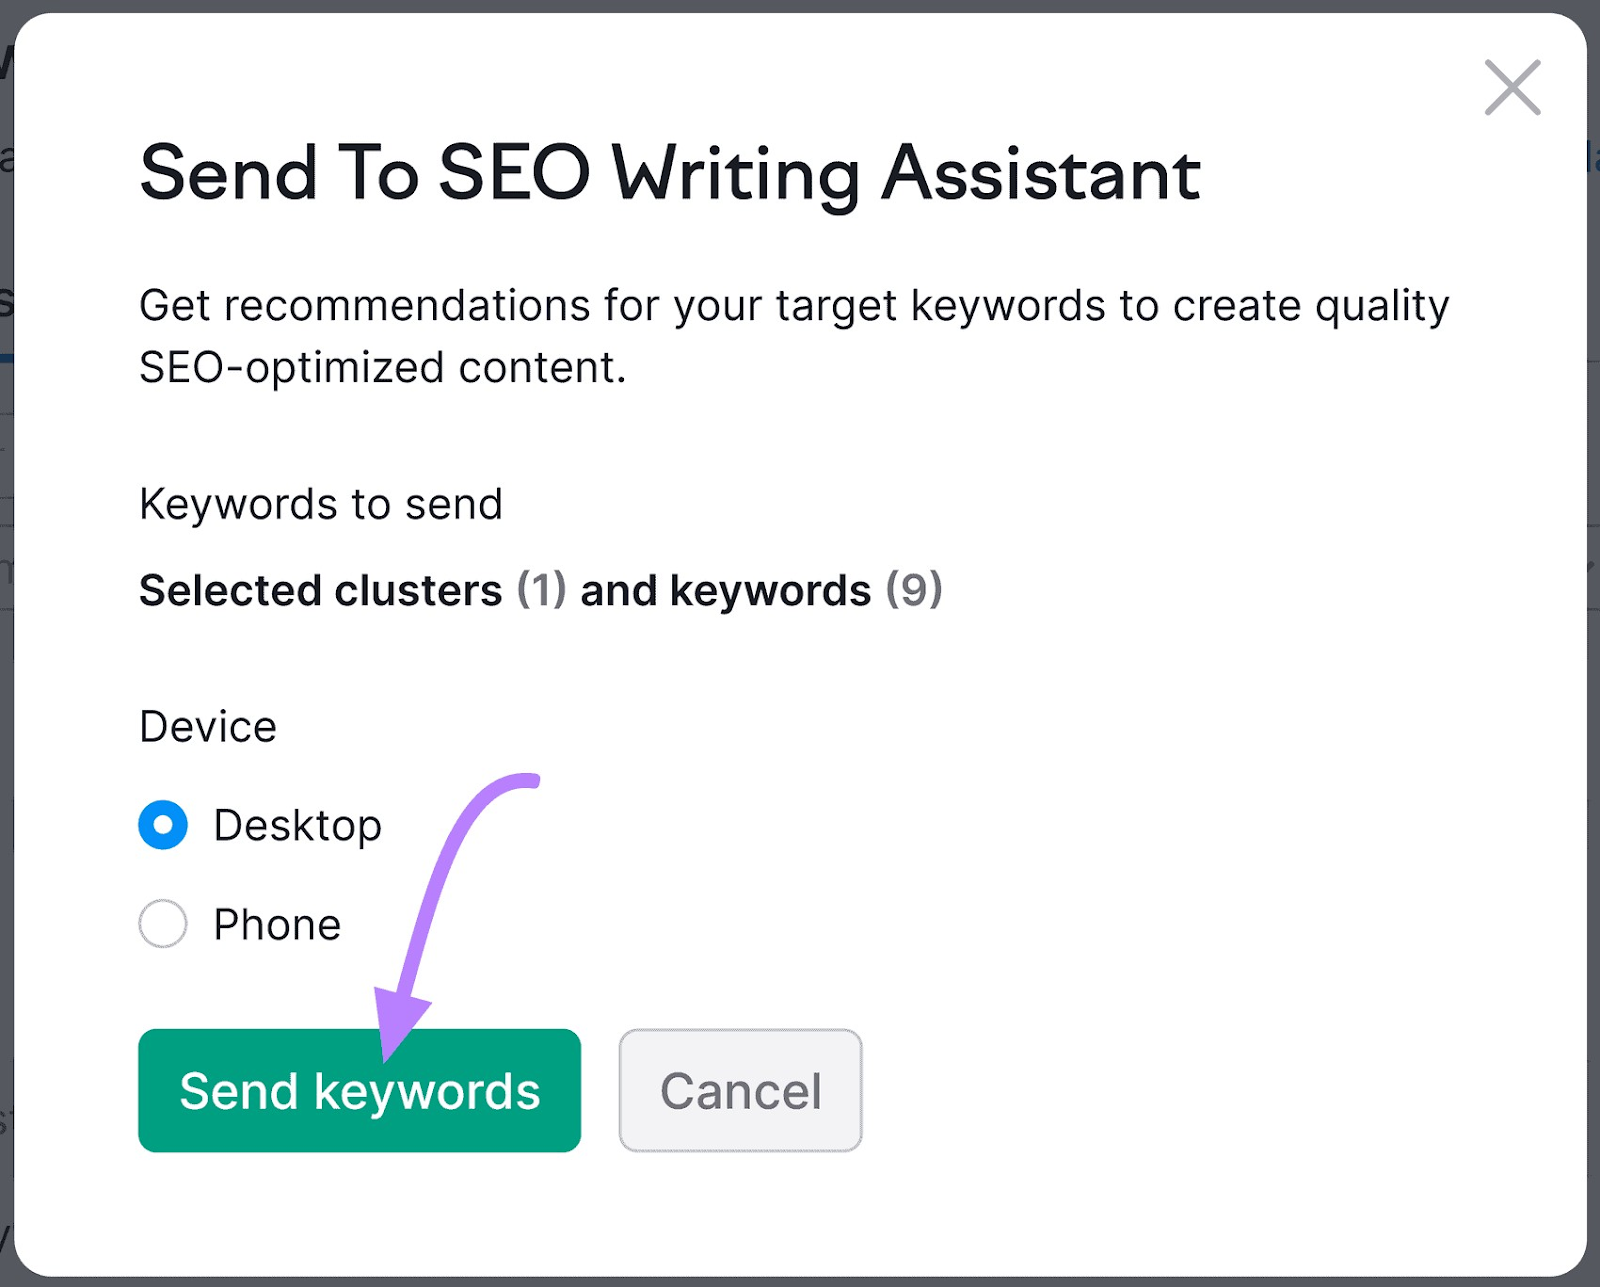 "Send To SEO Writing Assistant" popup window